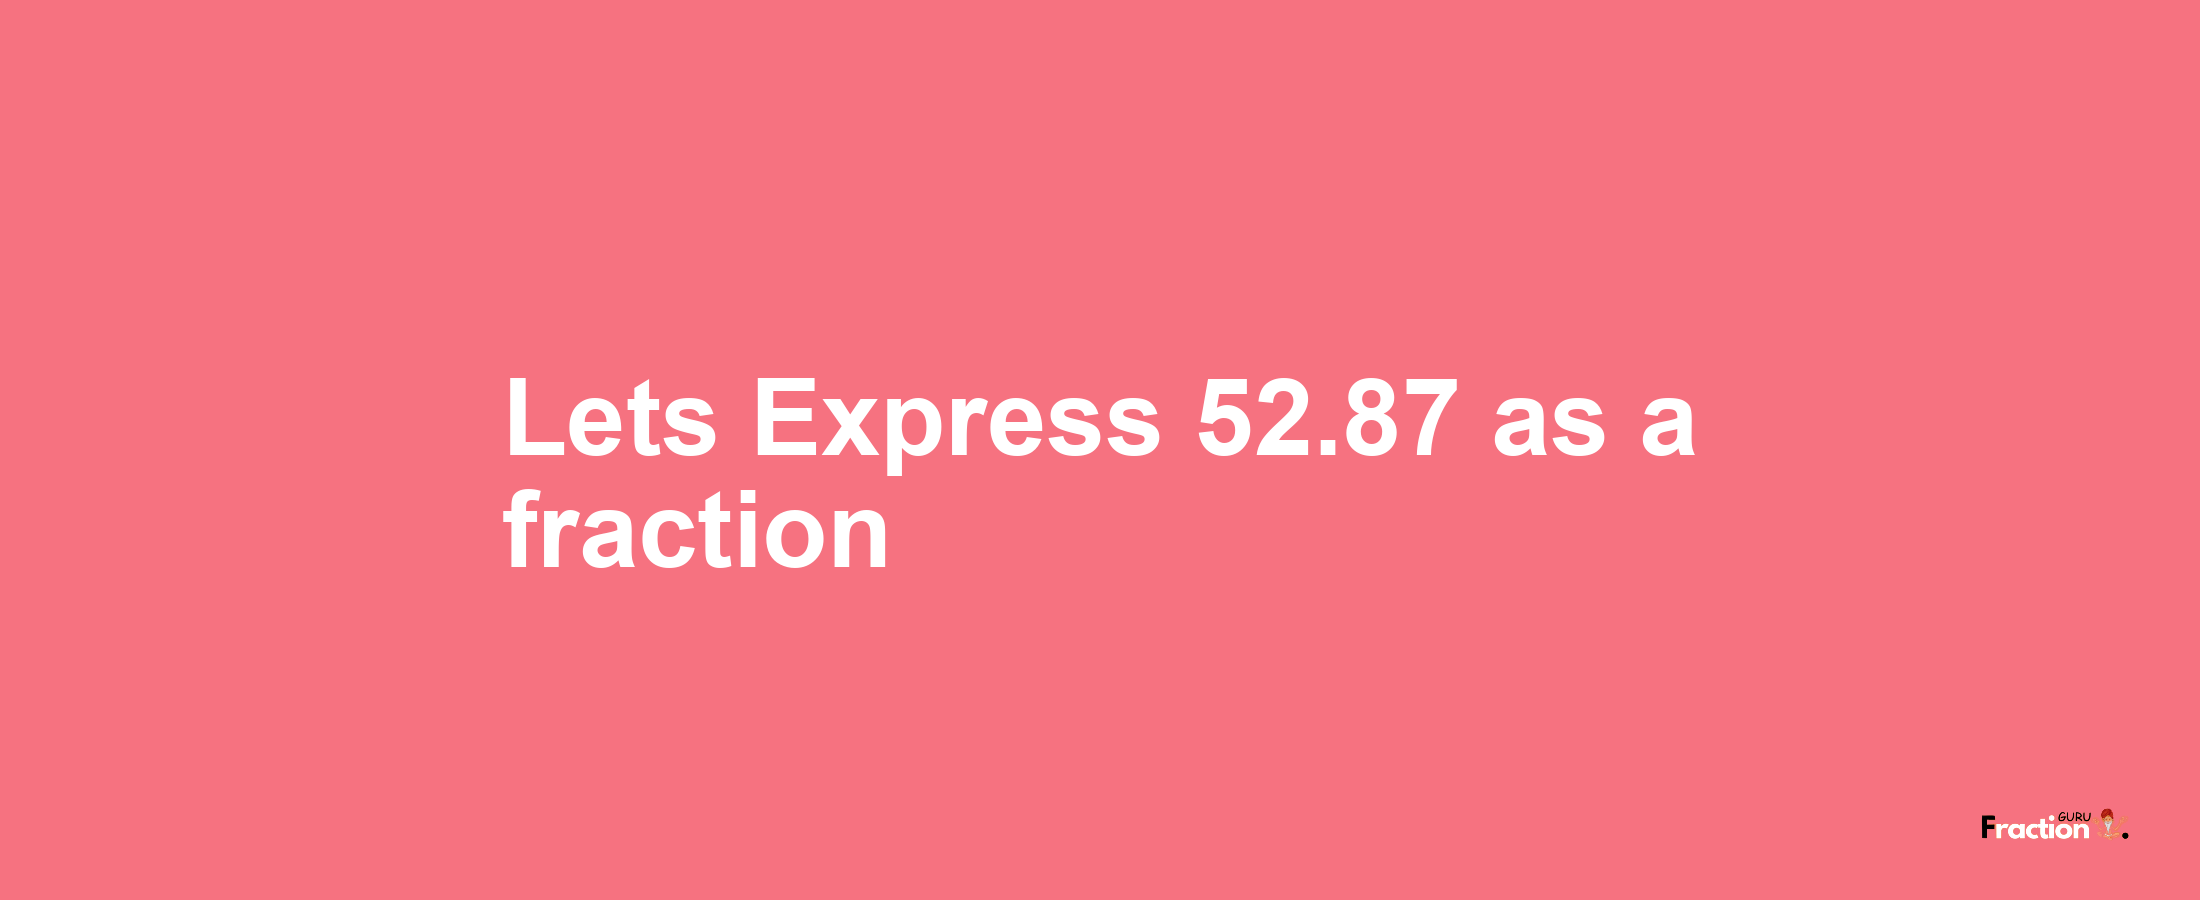 Lets Express 52.87 as afraction